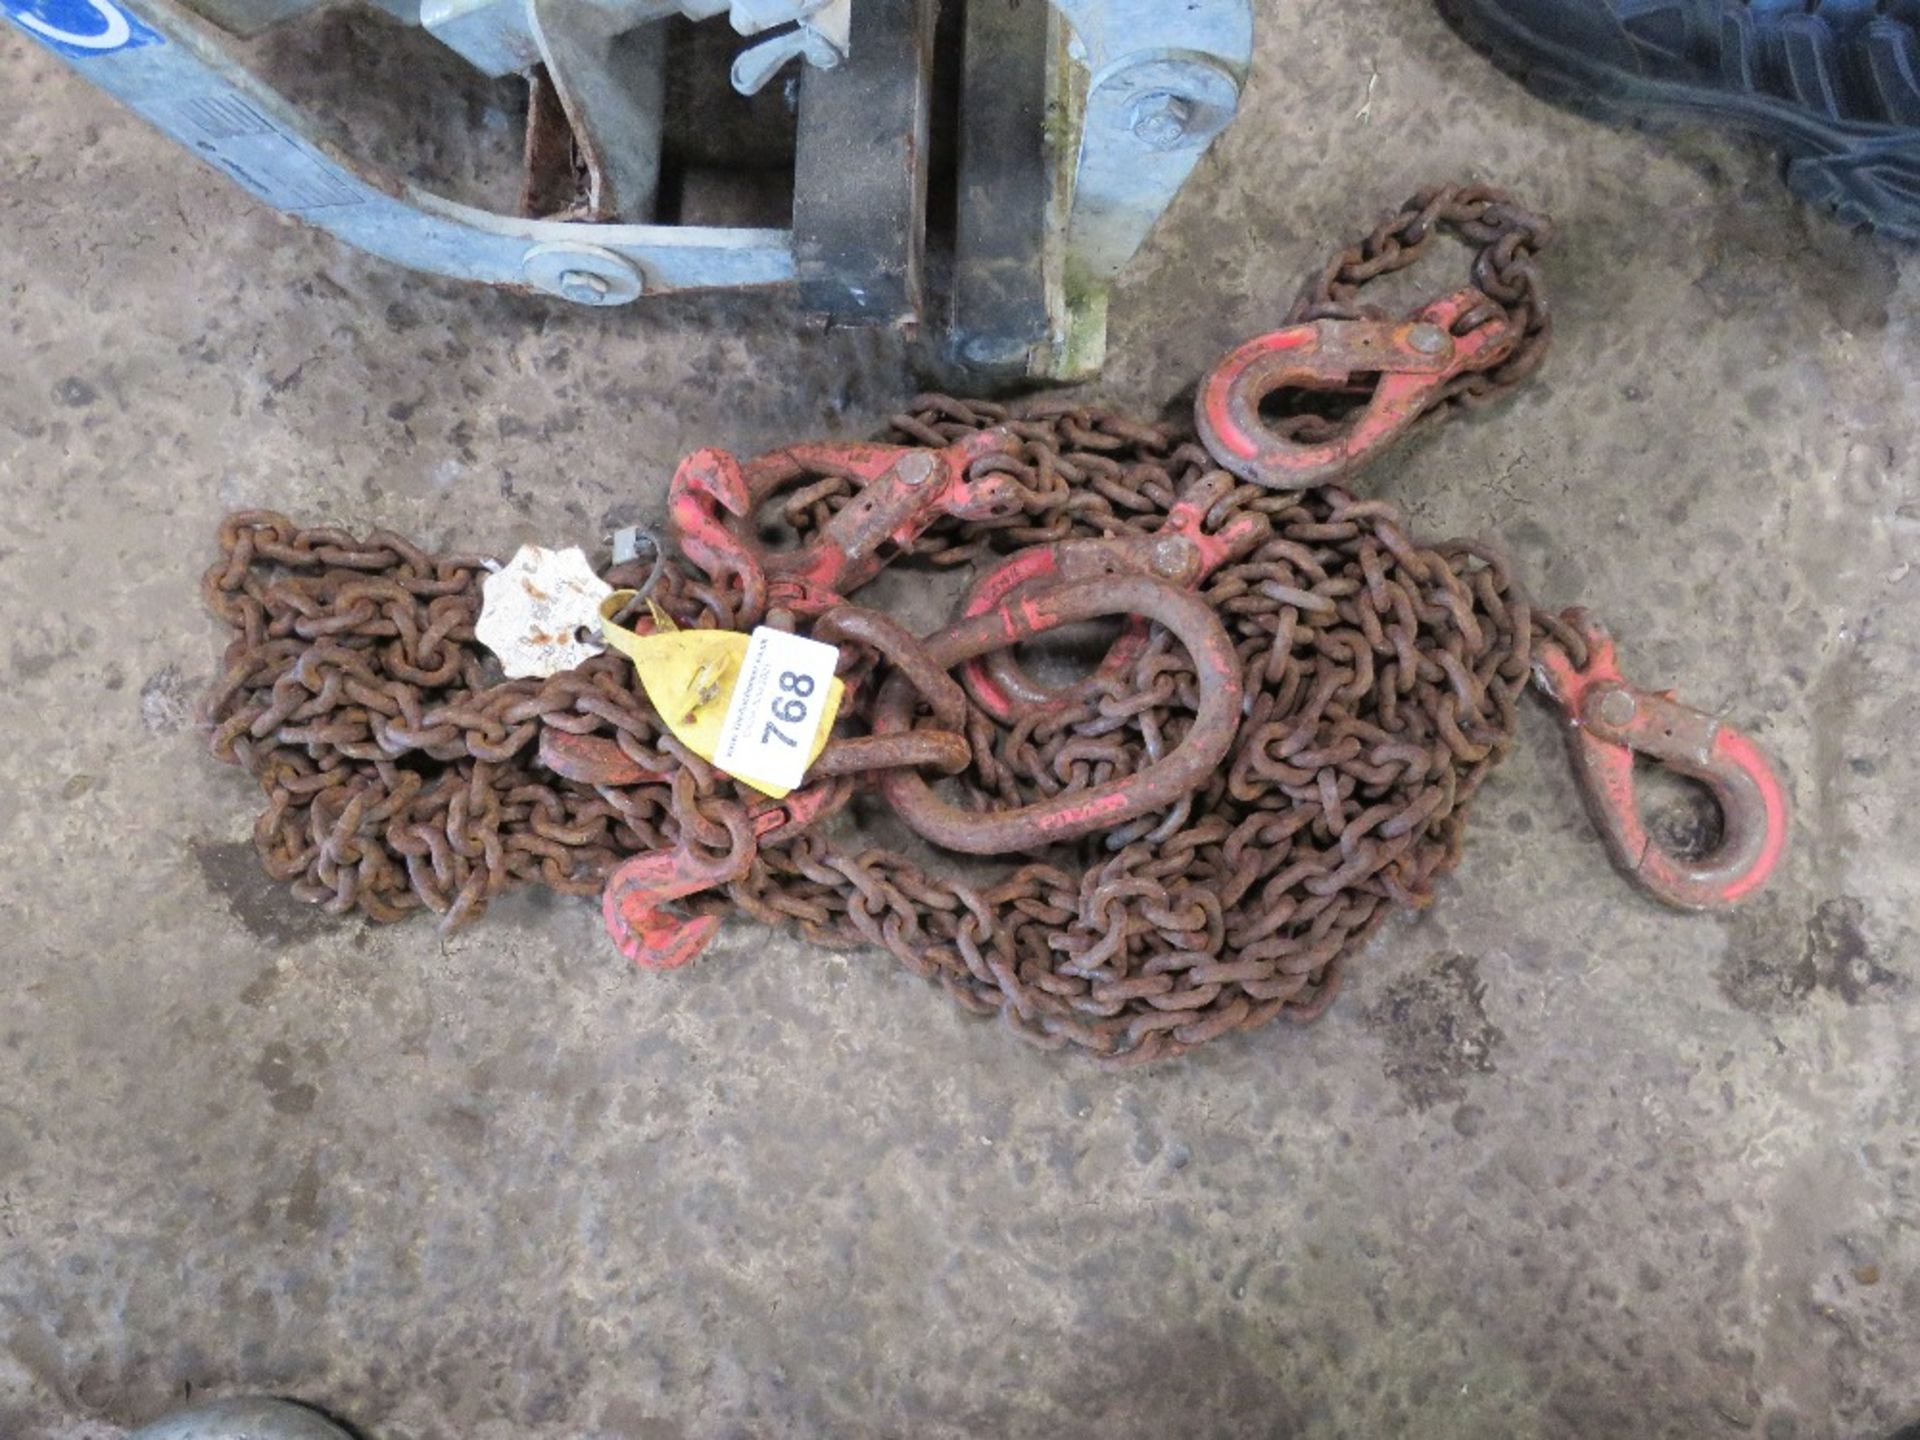 SET OF 4 LEGGED LIFTING CHAINS WITH SHORTENERS, 8FT LENGTH APPROX. THIS LOT IS SOLD UNDER THE AUC